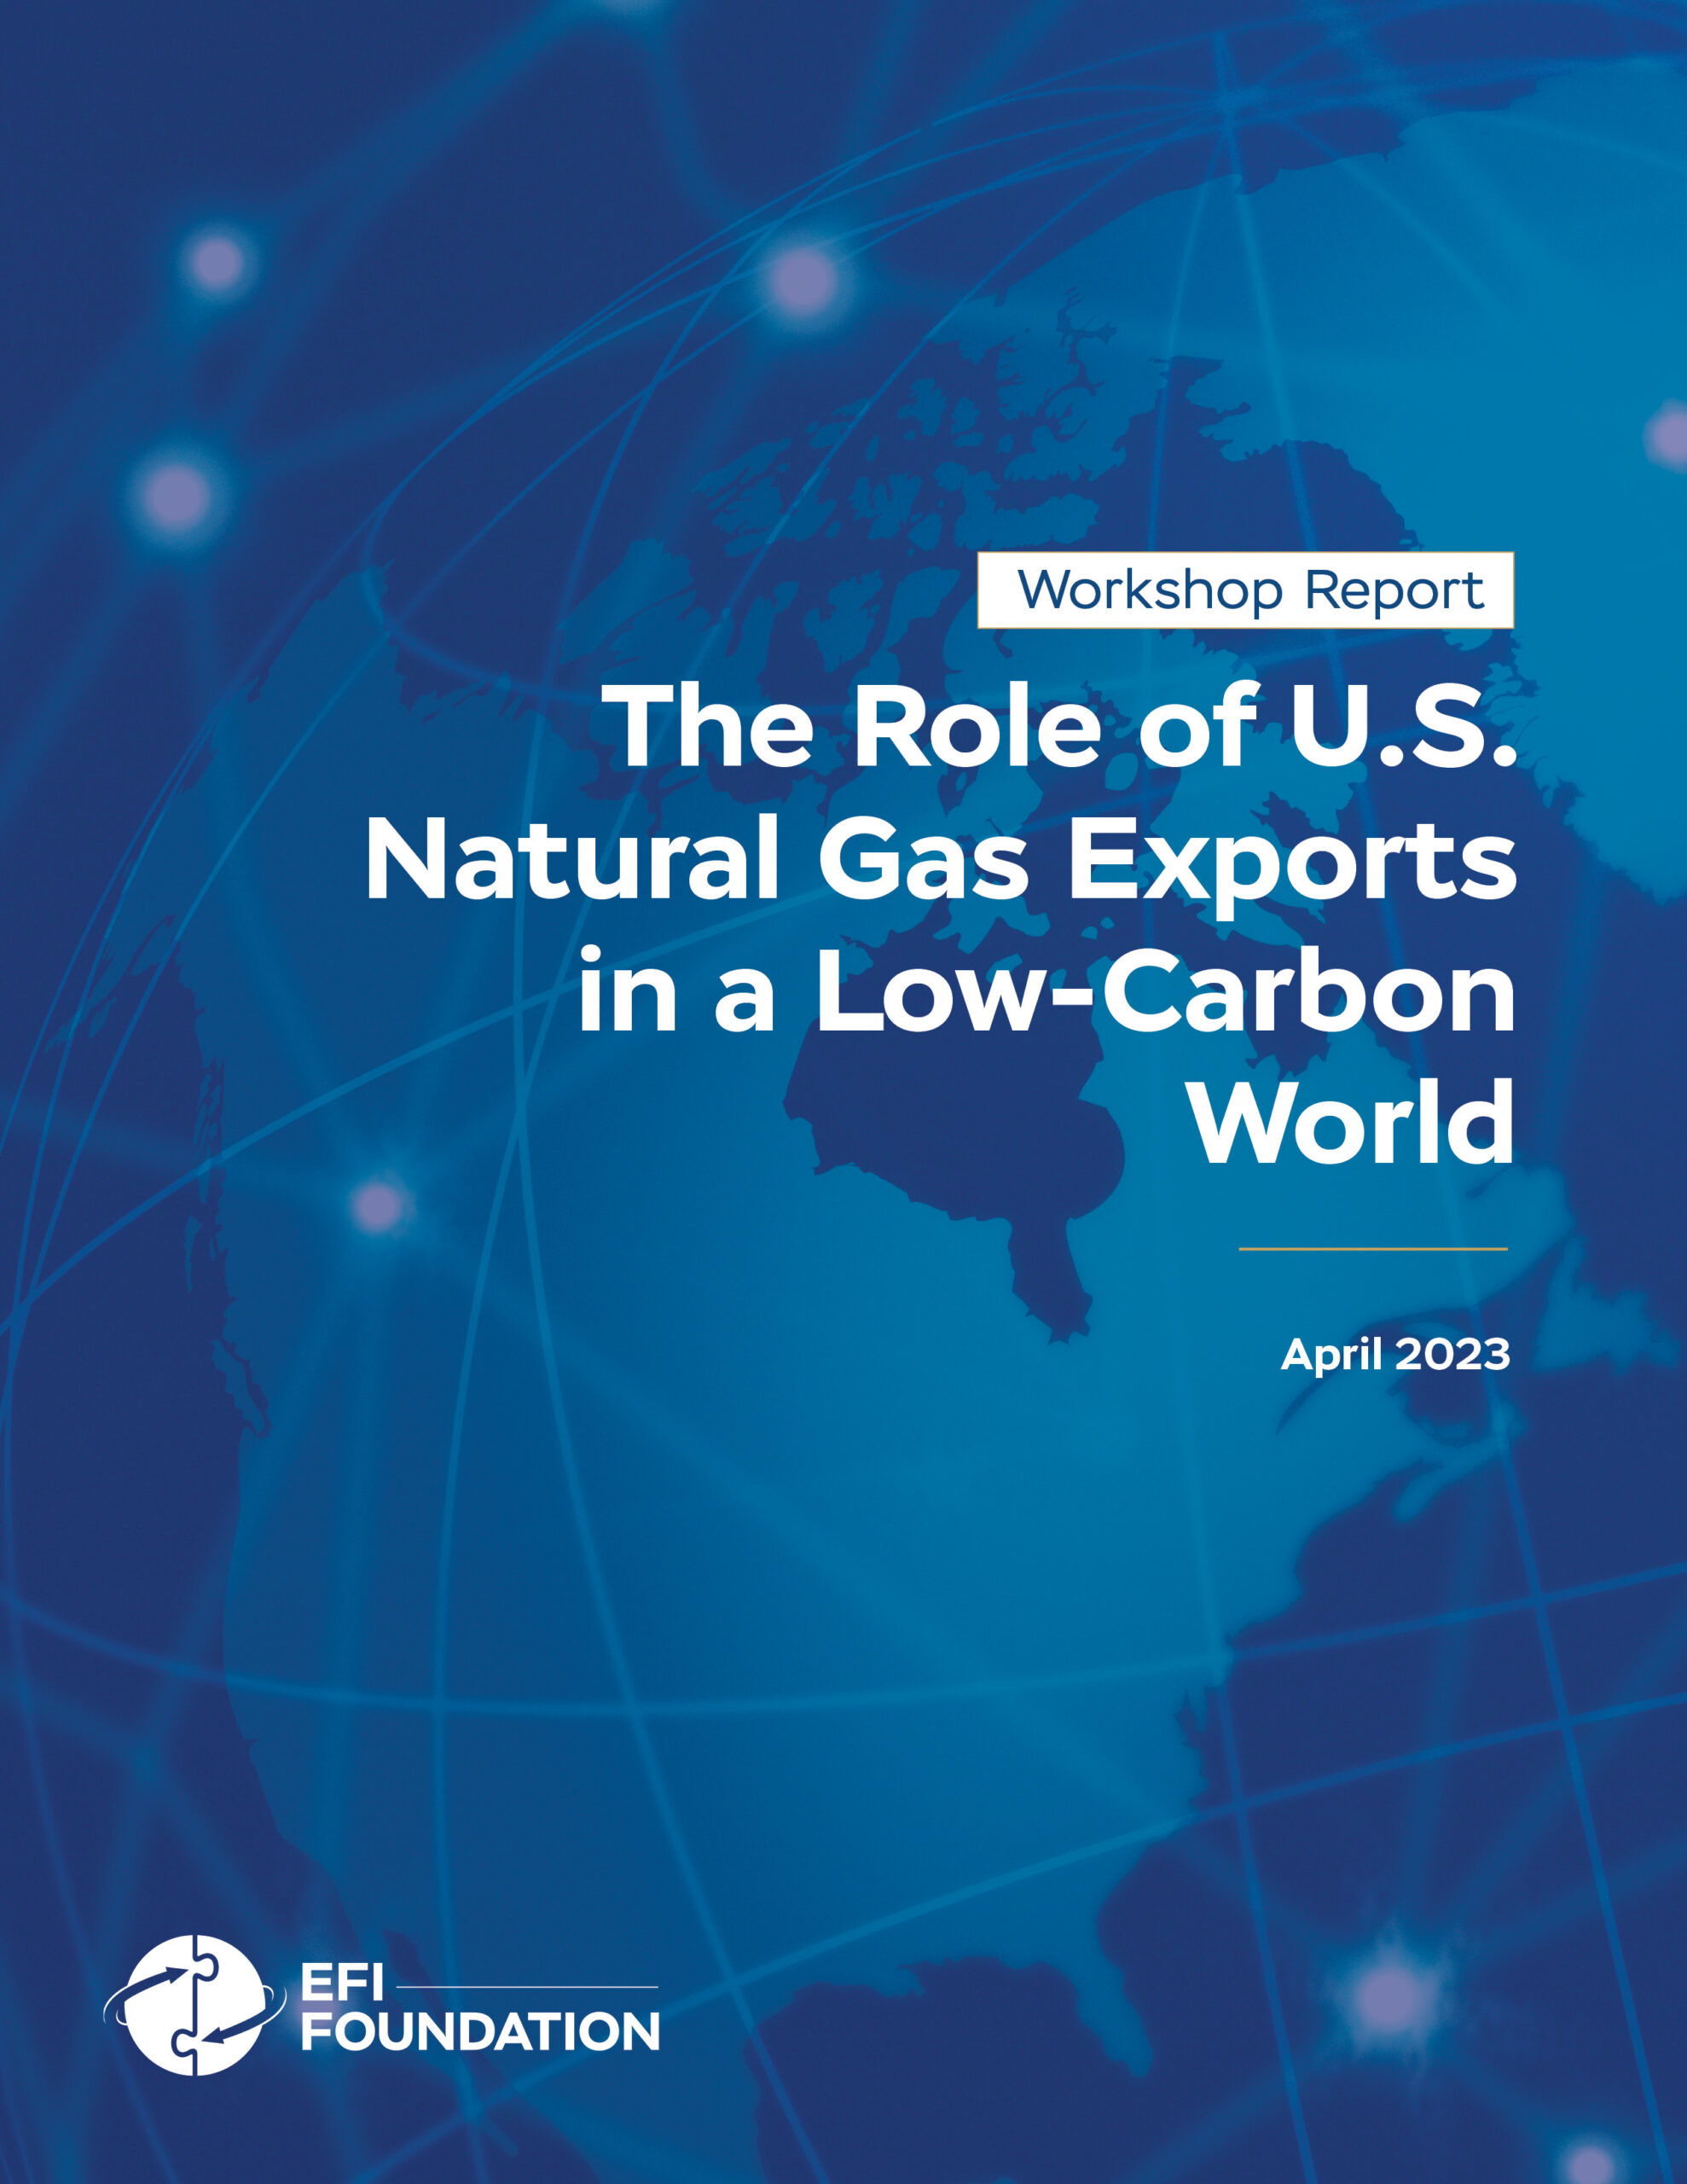 Photo of April 2023 global gas workshop report cover.